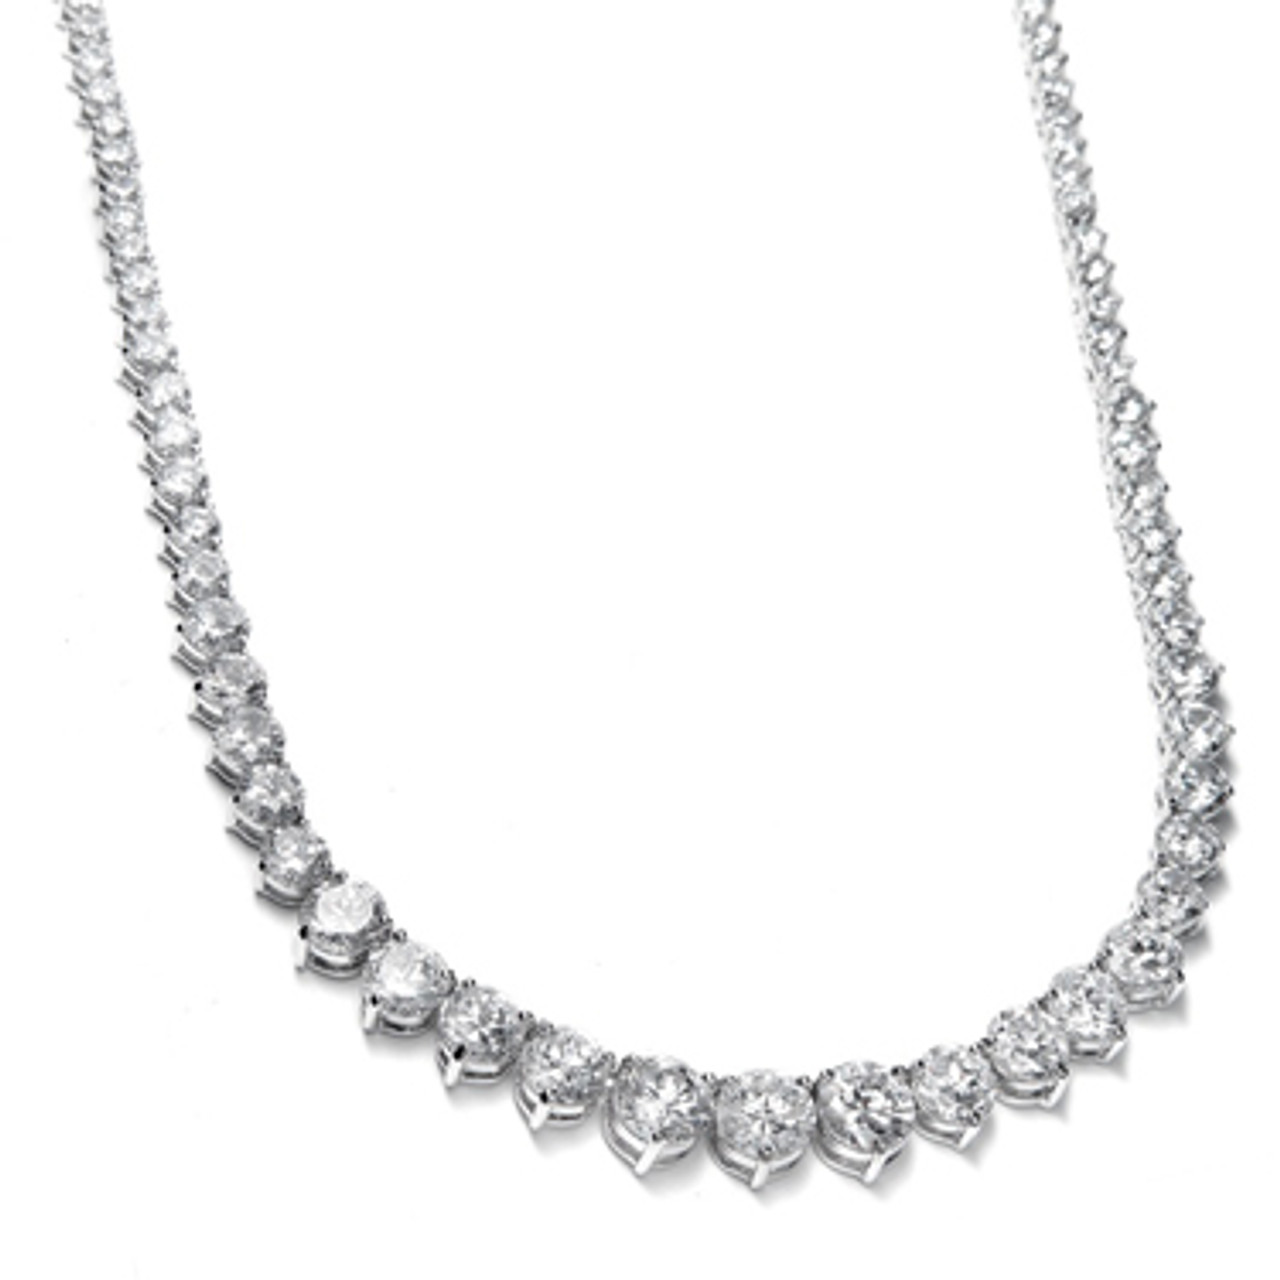 Graduating CZ Tennis Necklace in Sterling Silver